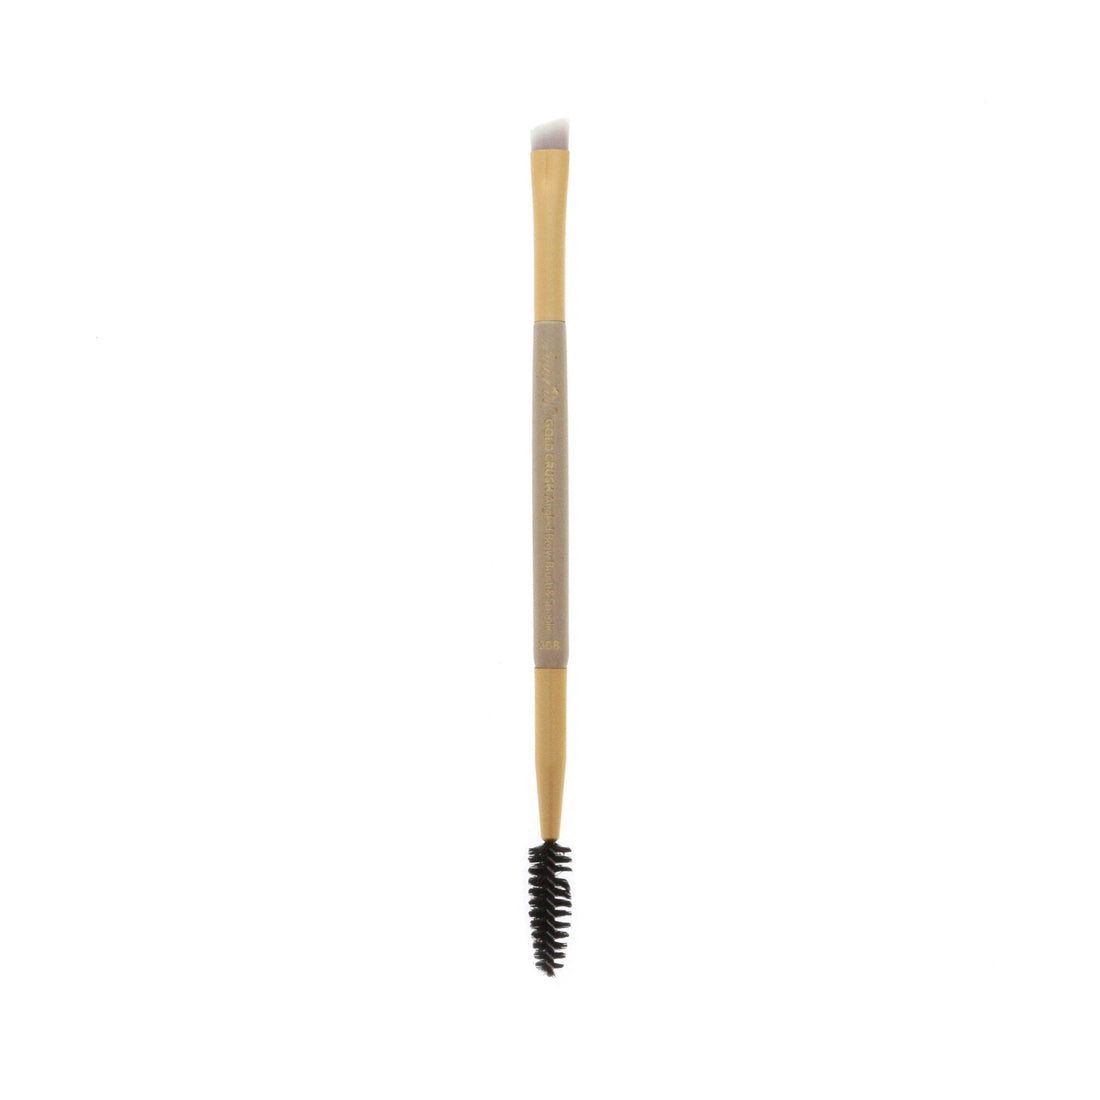 Glamour Us_Amorus_Tools &amp; Brushes_Angled Brow &amp; Spoolie 308 - Gold Crush Makeup Brush__BR-308